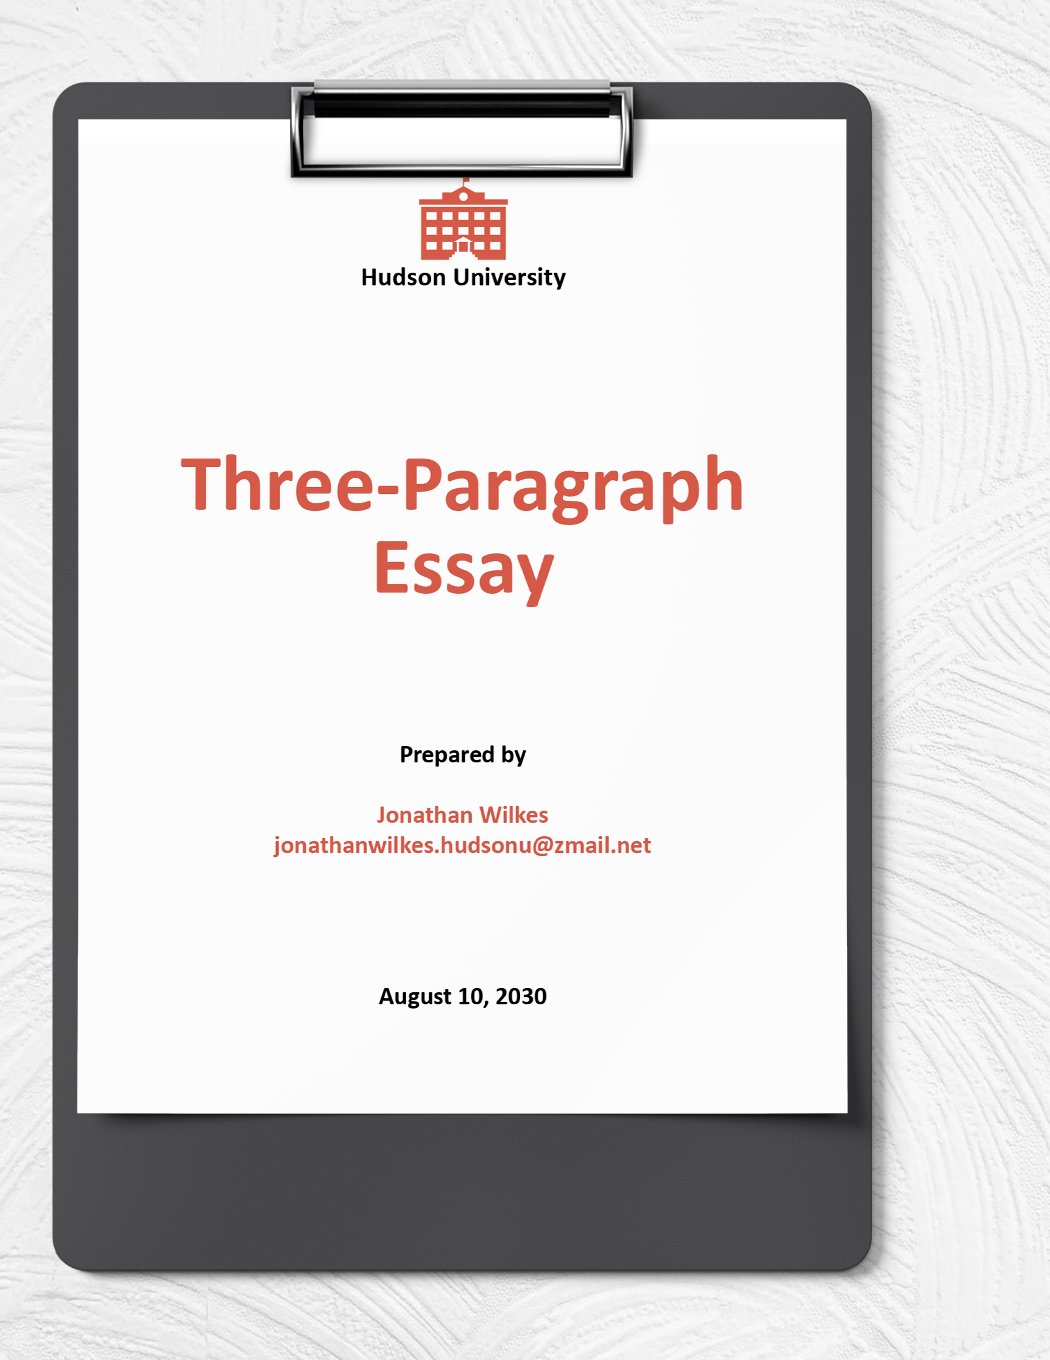 Three-Paragraph Essay Template in Word, Google Docs